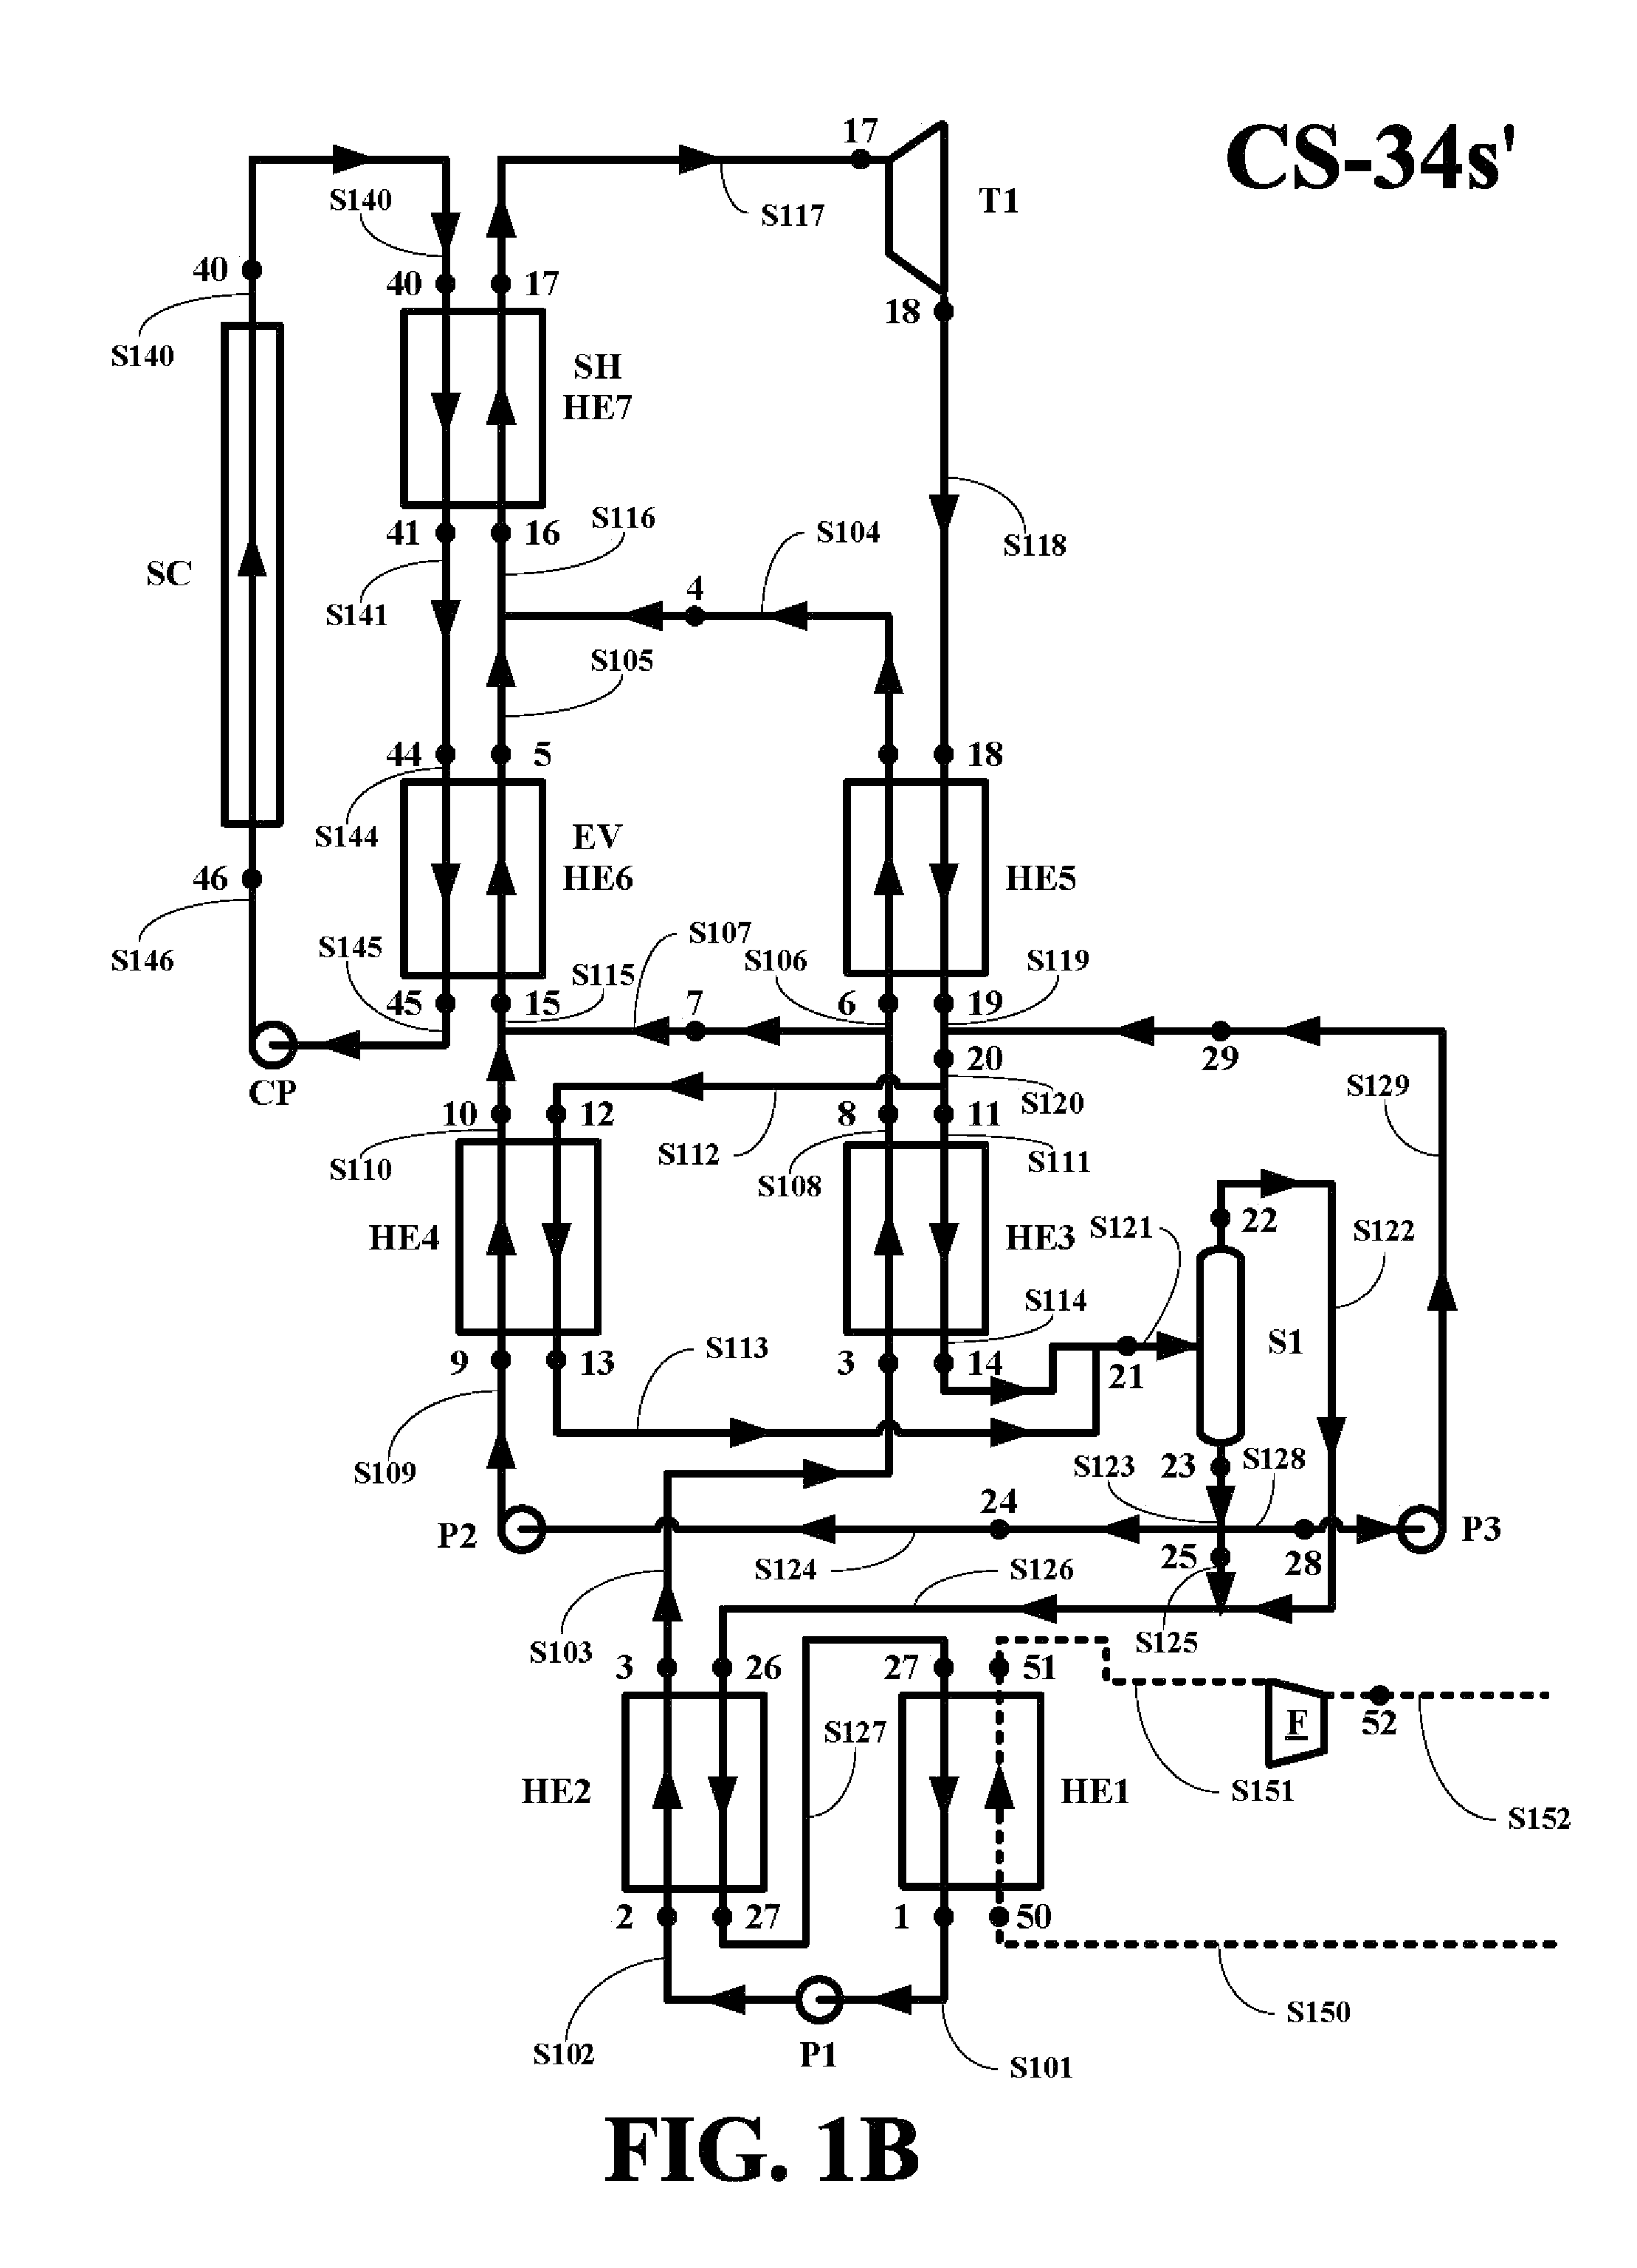 Power systems designed for the utilization of heat generated by solar-thermal collectors and methods for making and using same